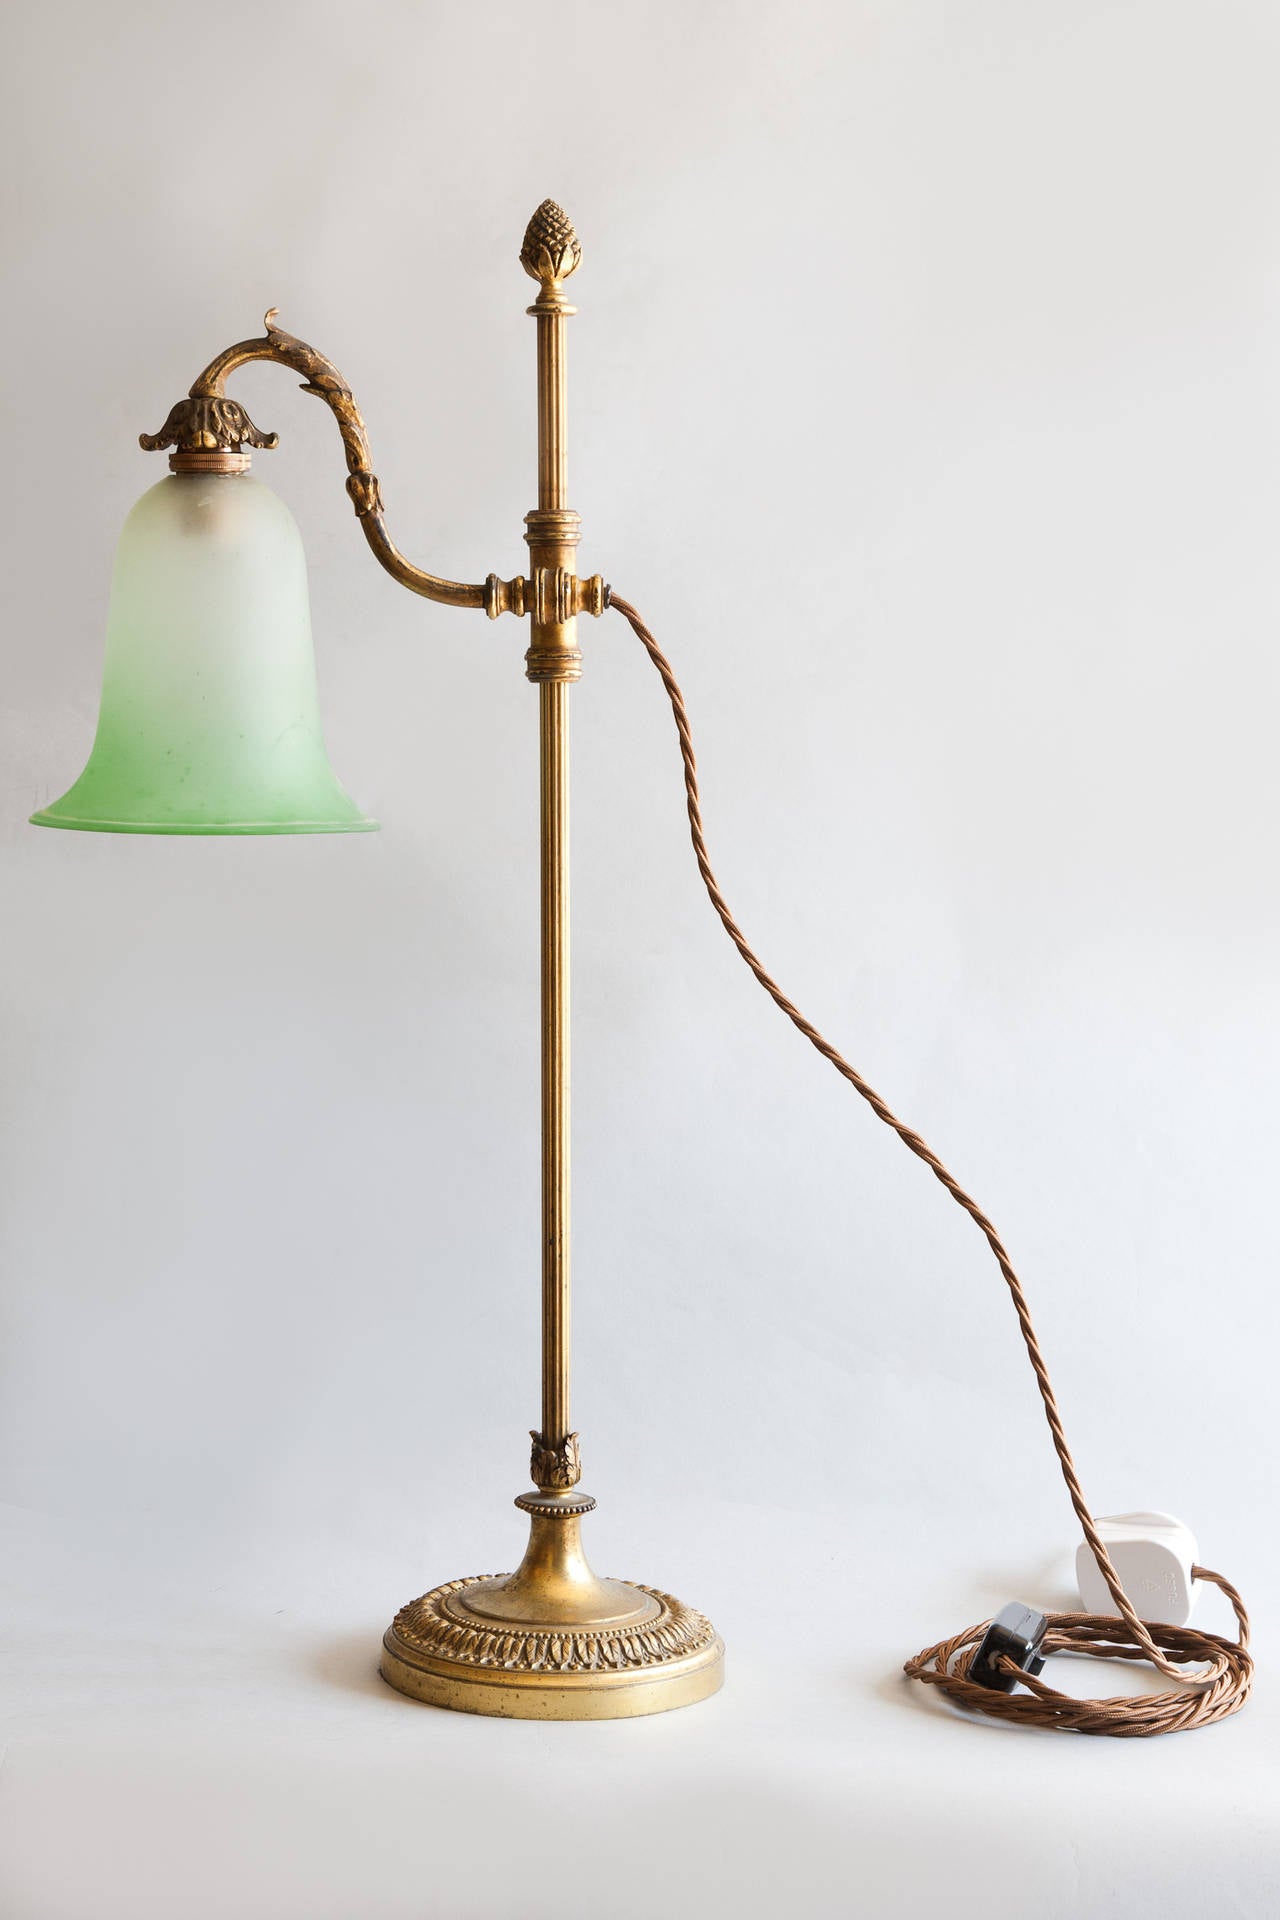 With green glass tulip shade. The light fitting moves up and down the centre stalk.

Small marks and scuffs consistent with age. Currently electrified for the UK.